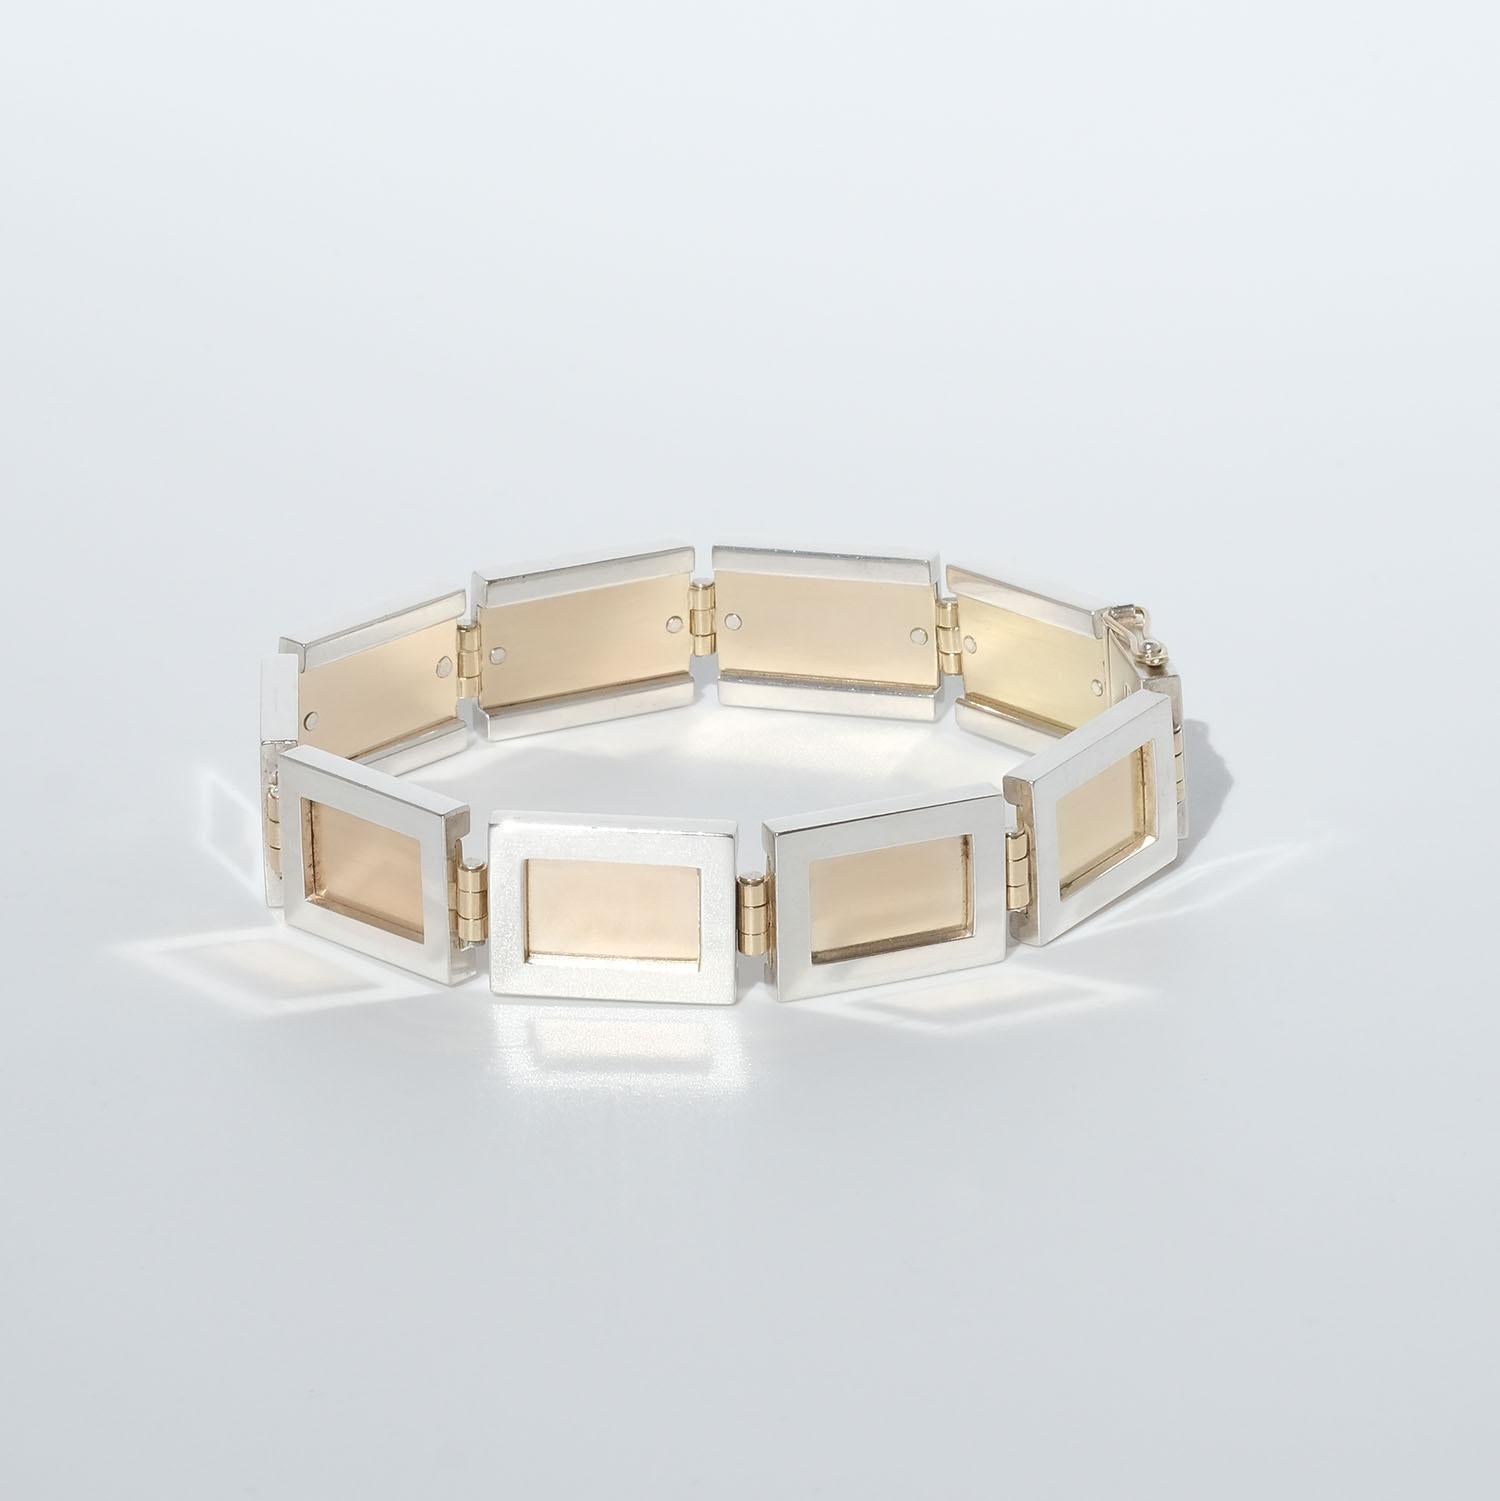 This bracelet are made out of 18 karat gold and sterling silver rectangles which are linked together. The bracelet closes easily with a box clasp.

The design of the bracelet is making it slide beautifully down its wearer's wrist. This is a jewelry